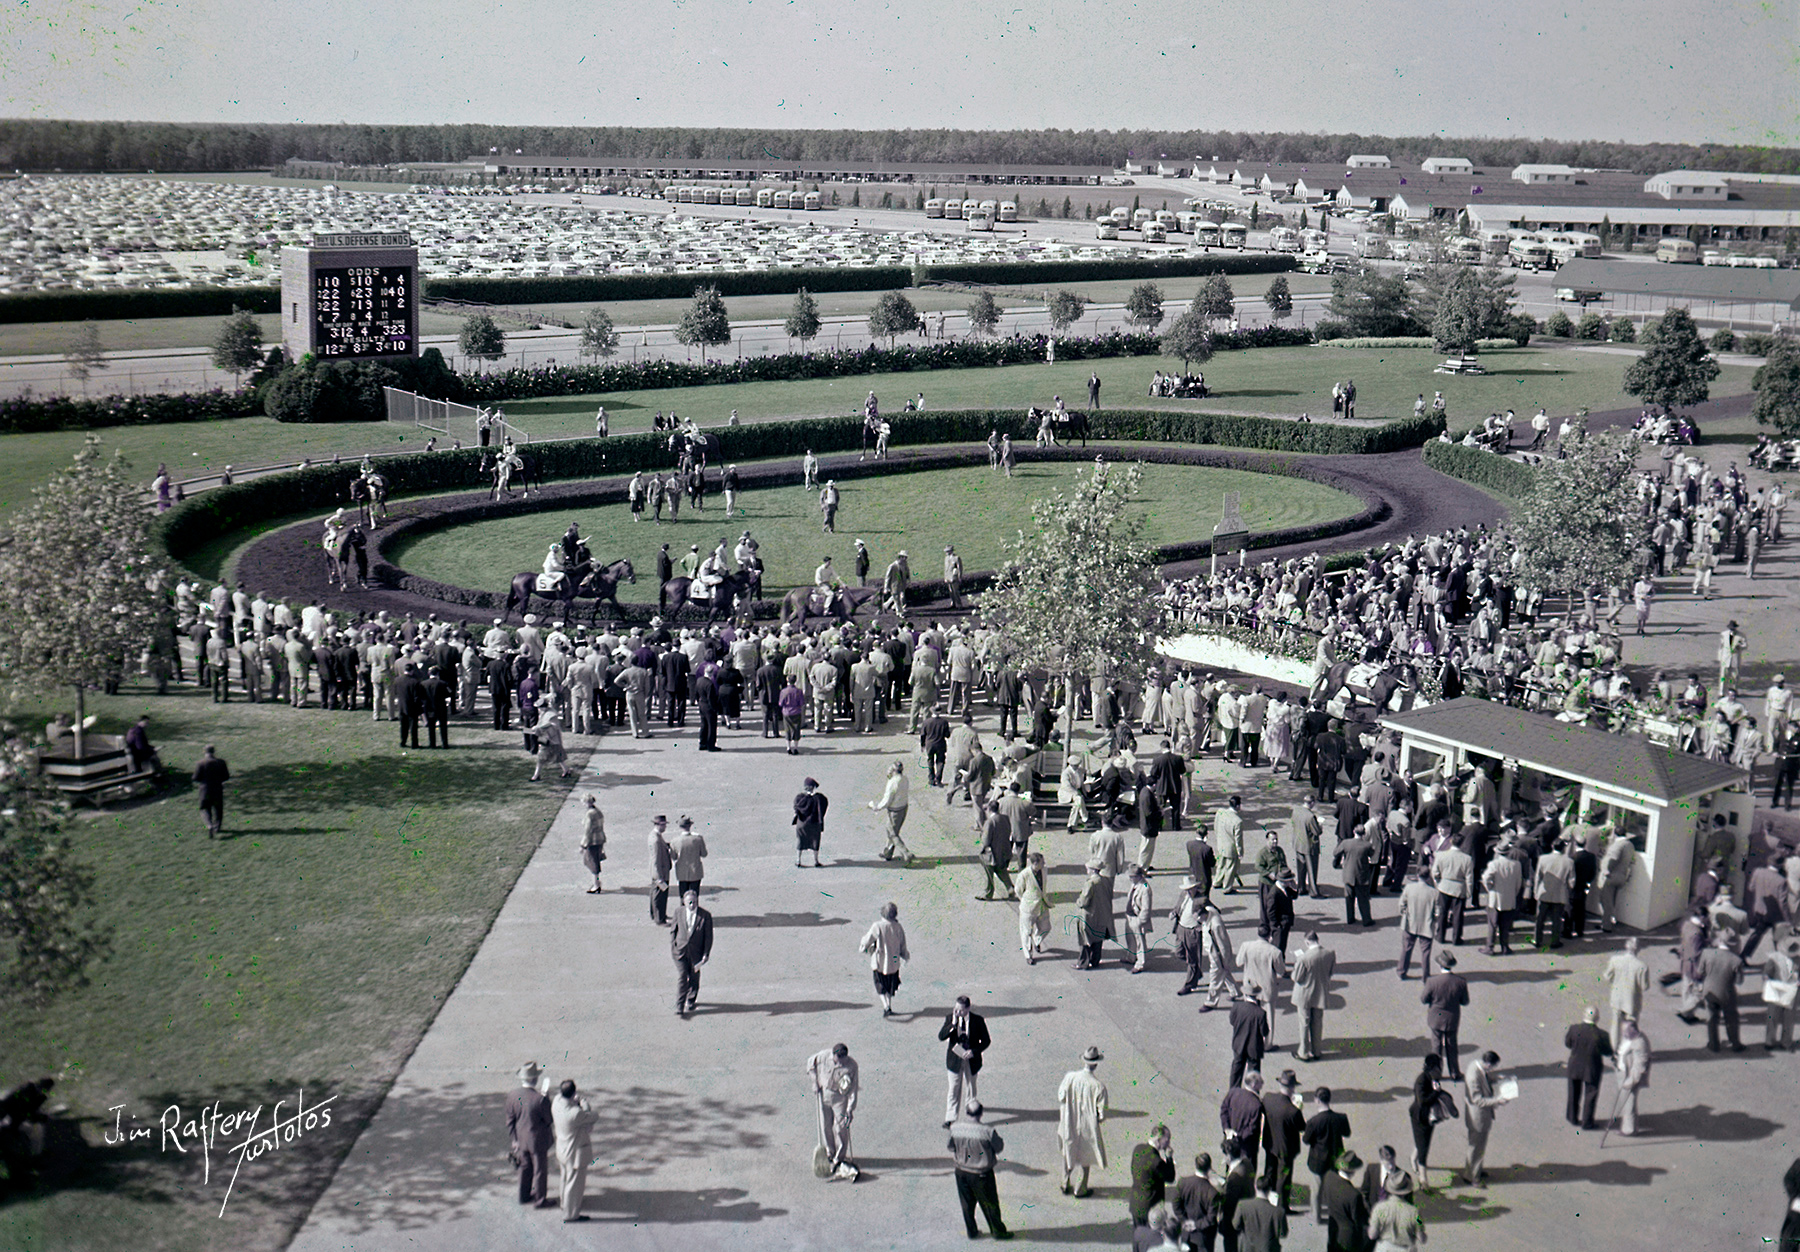 Atlantic City Race Course paddock, faded color image, likely 1955, as Raftery shot color there in 1955 — and almost nowhere else that far back (Jim Raftery Turfotos)